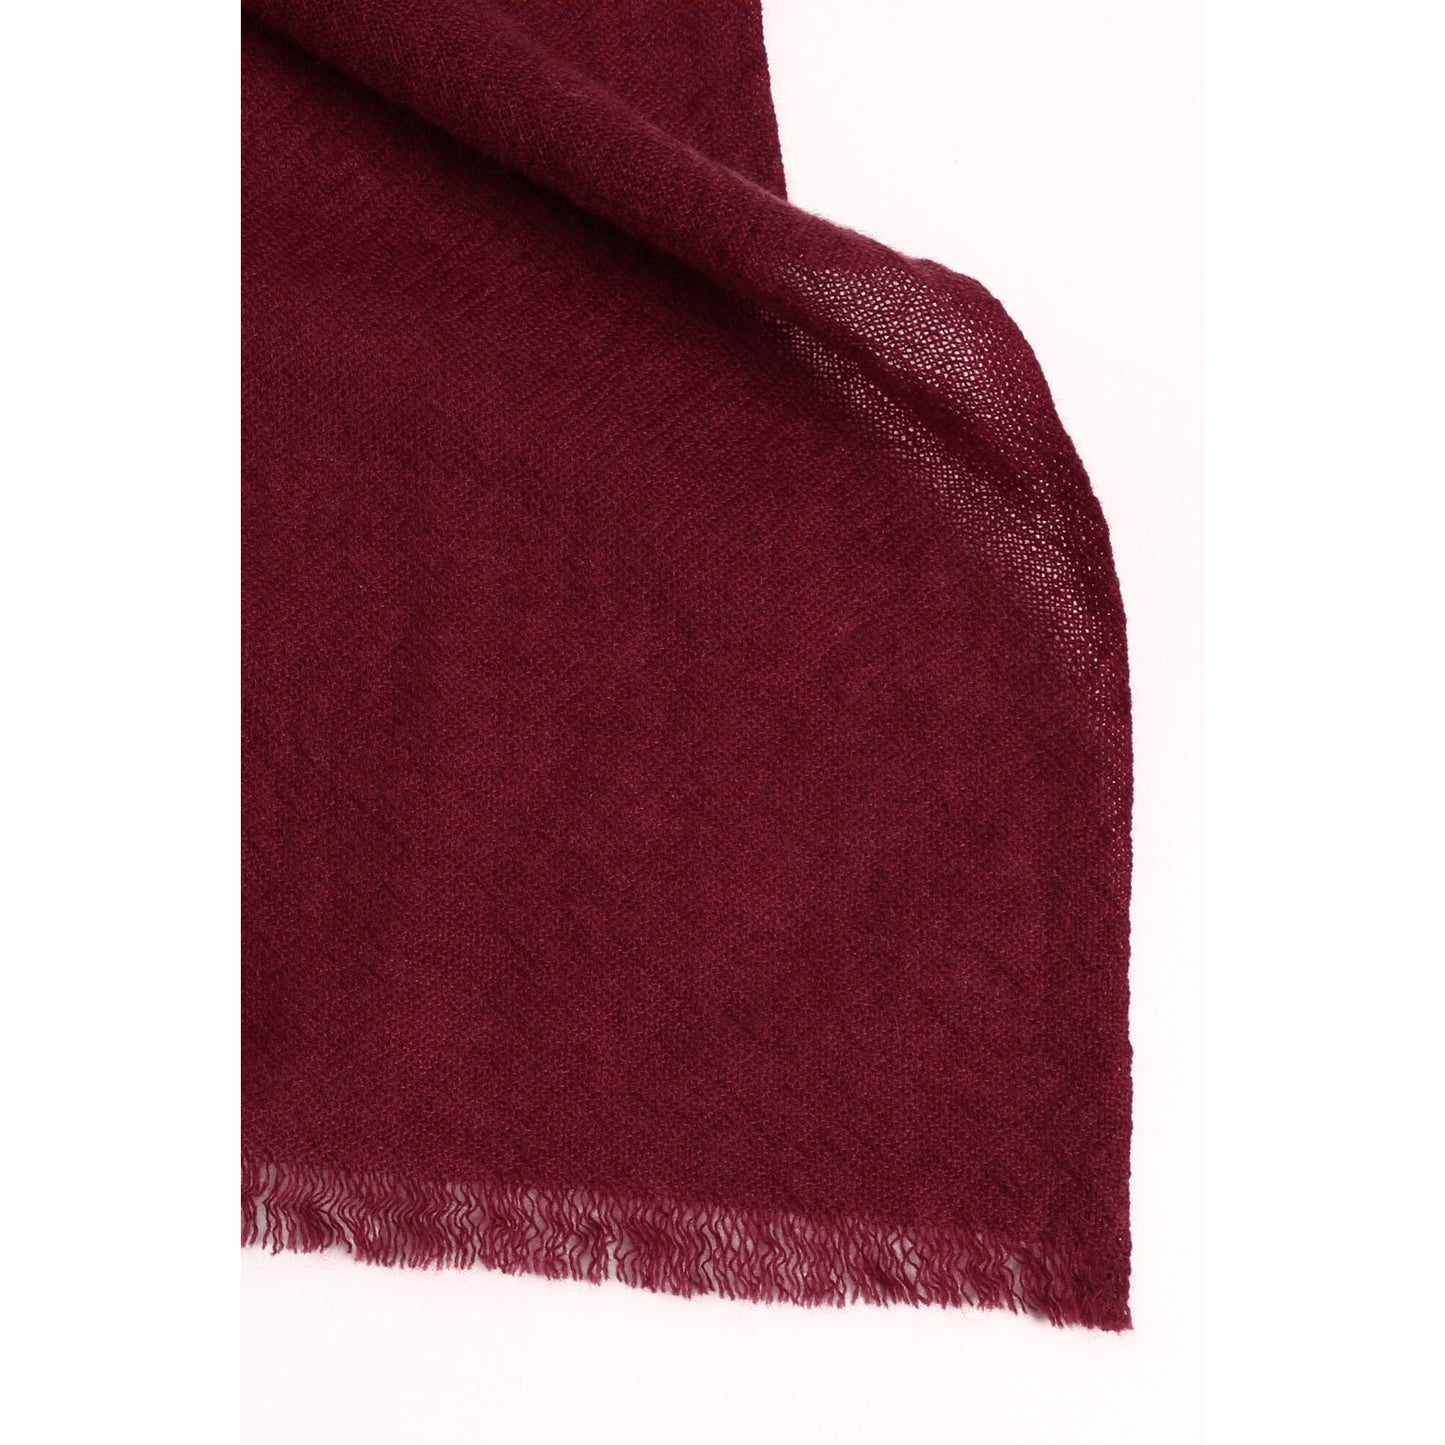 Oversize Luxe Scarf Barolo - Crumpet Chowk